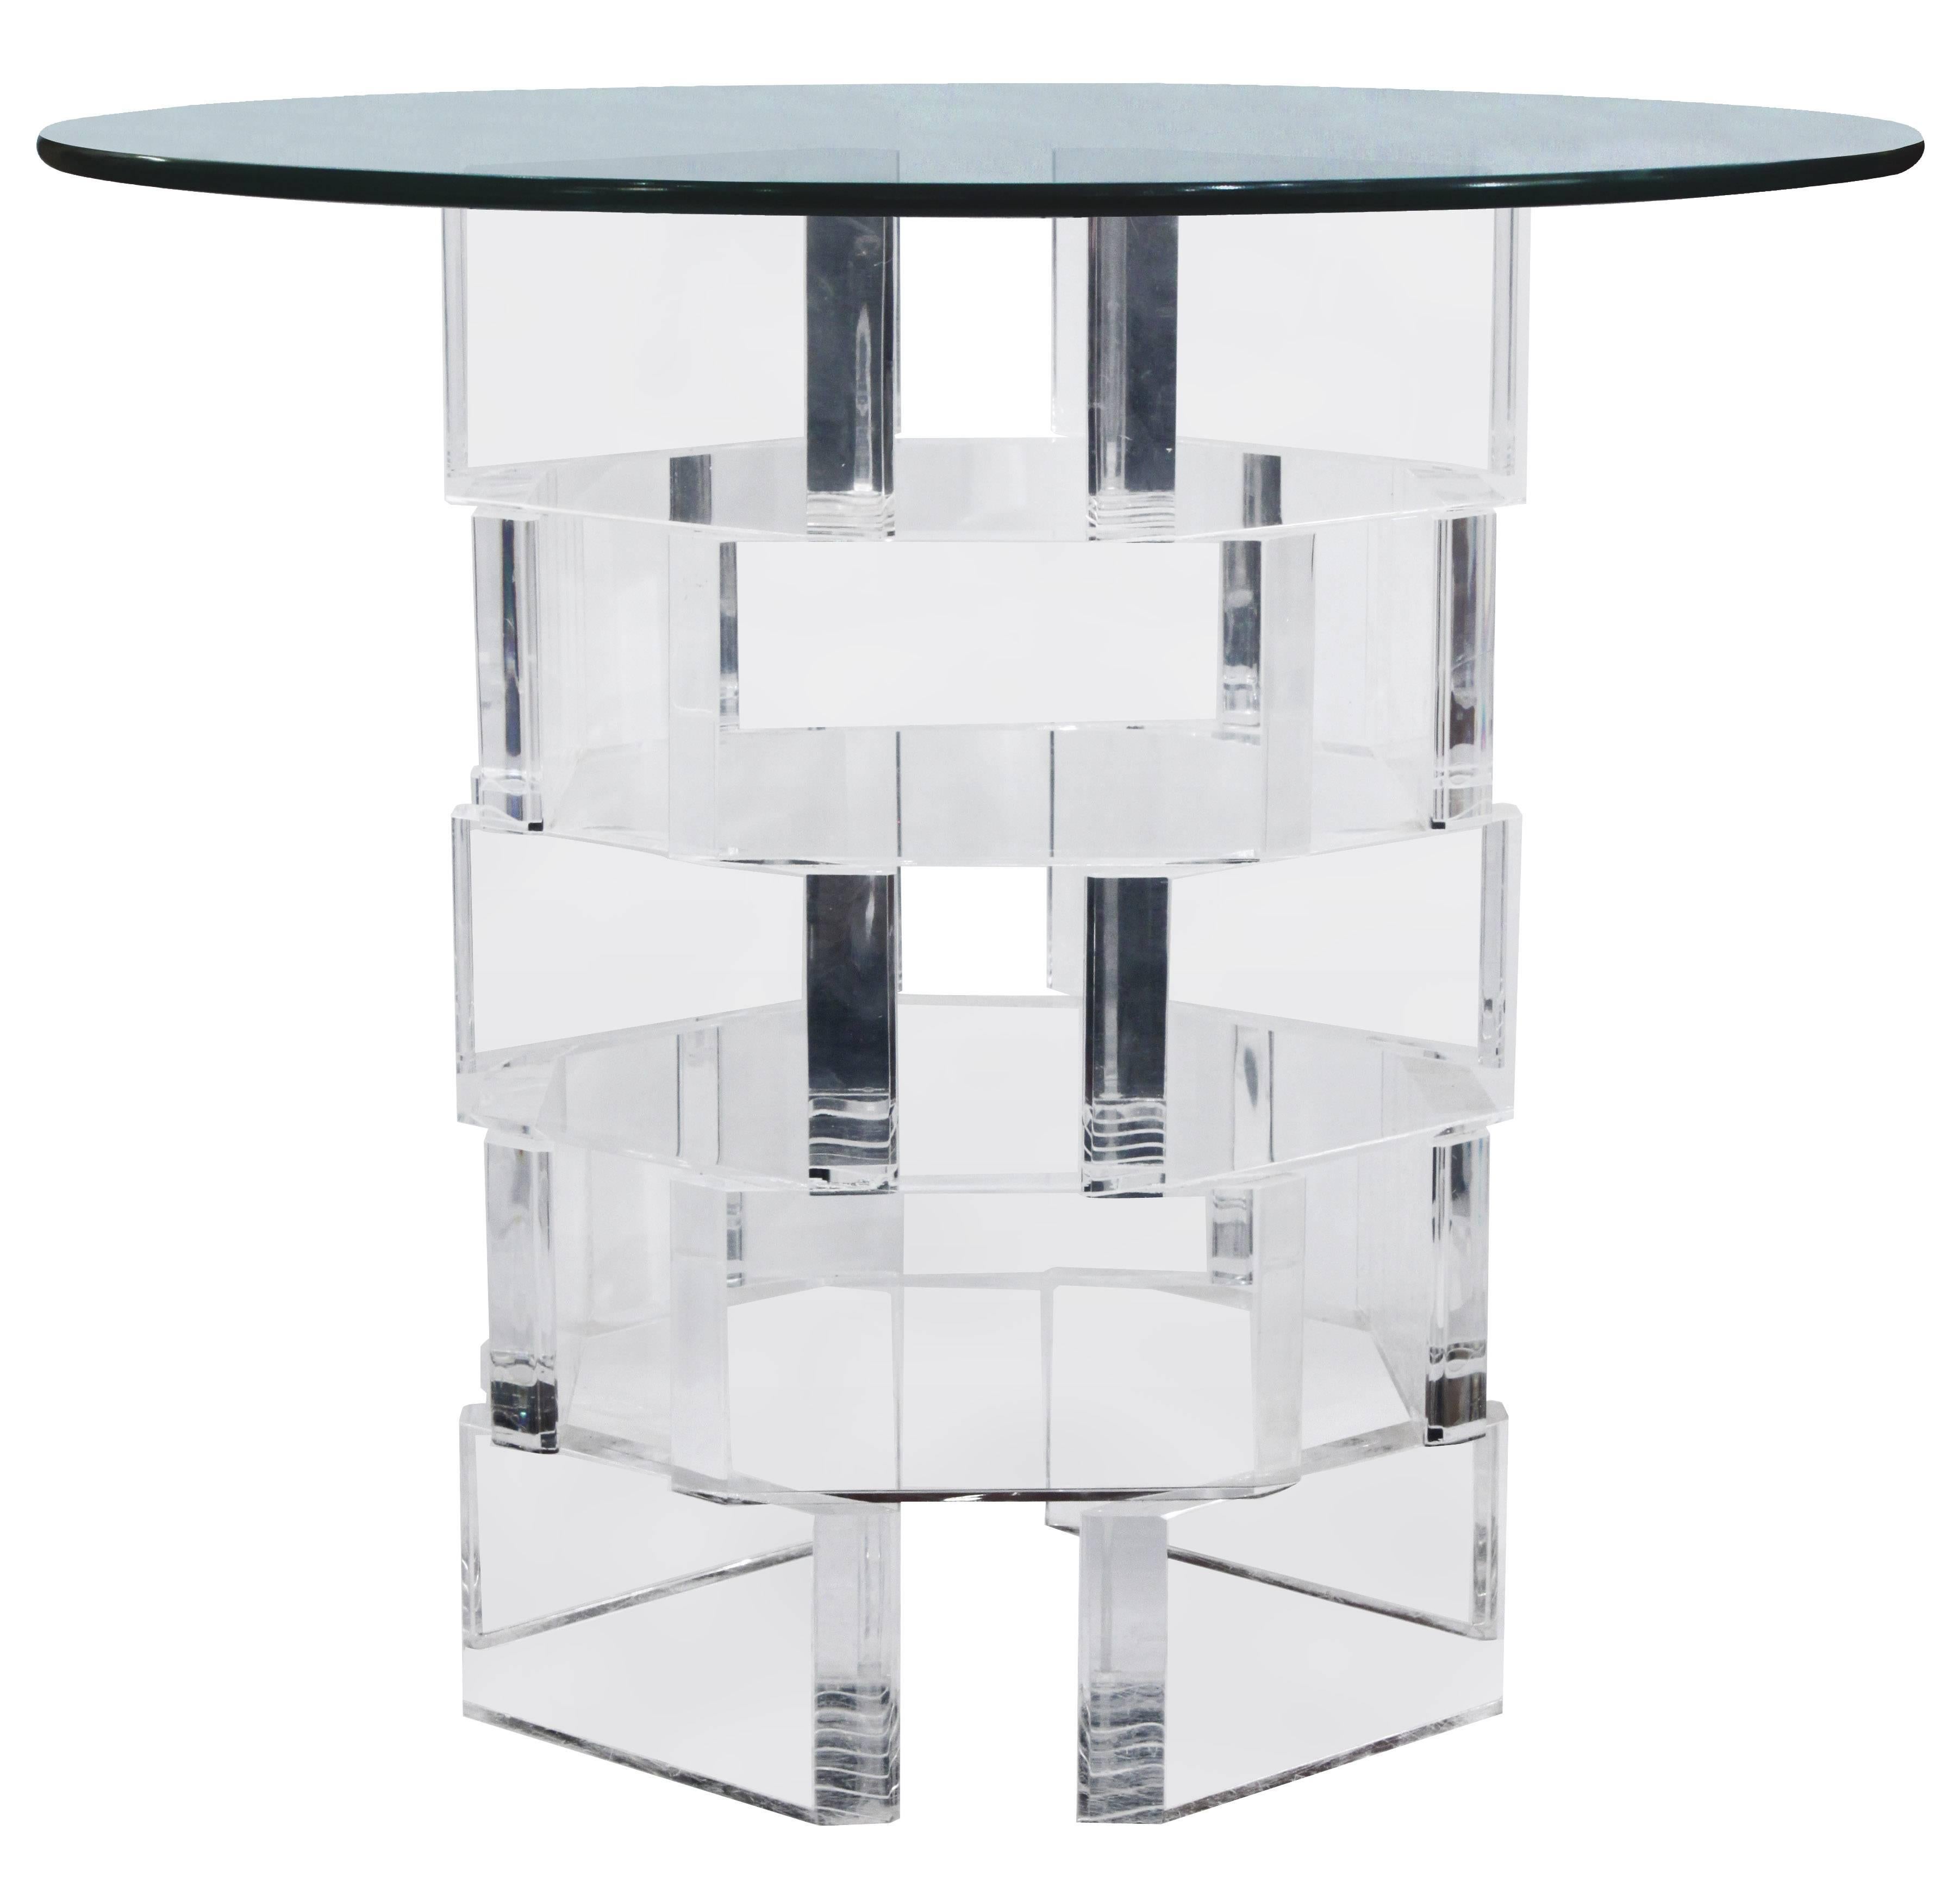 Chic side table the base in stacked Lucite blocks with a glass top, American, 1970s. The base is 13 inches wide by 13 inches deep.